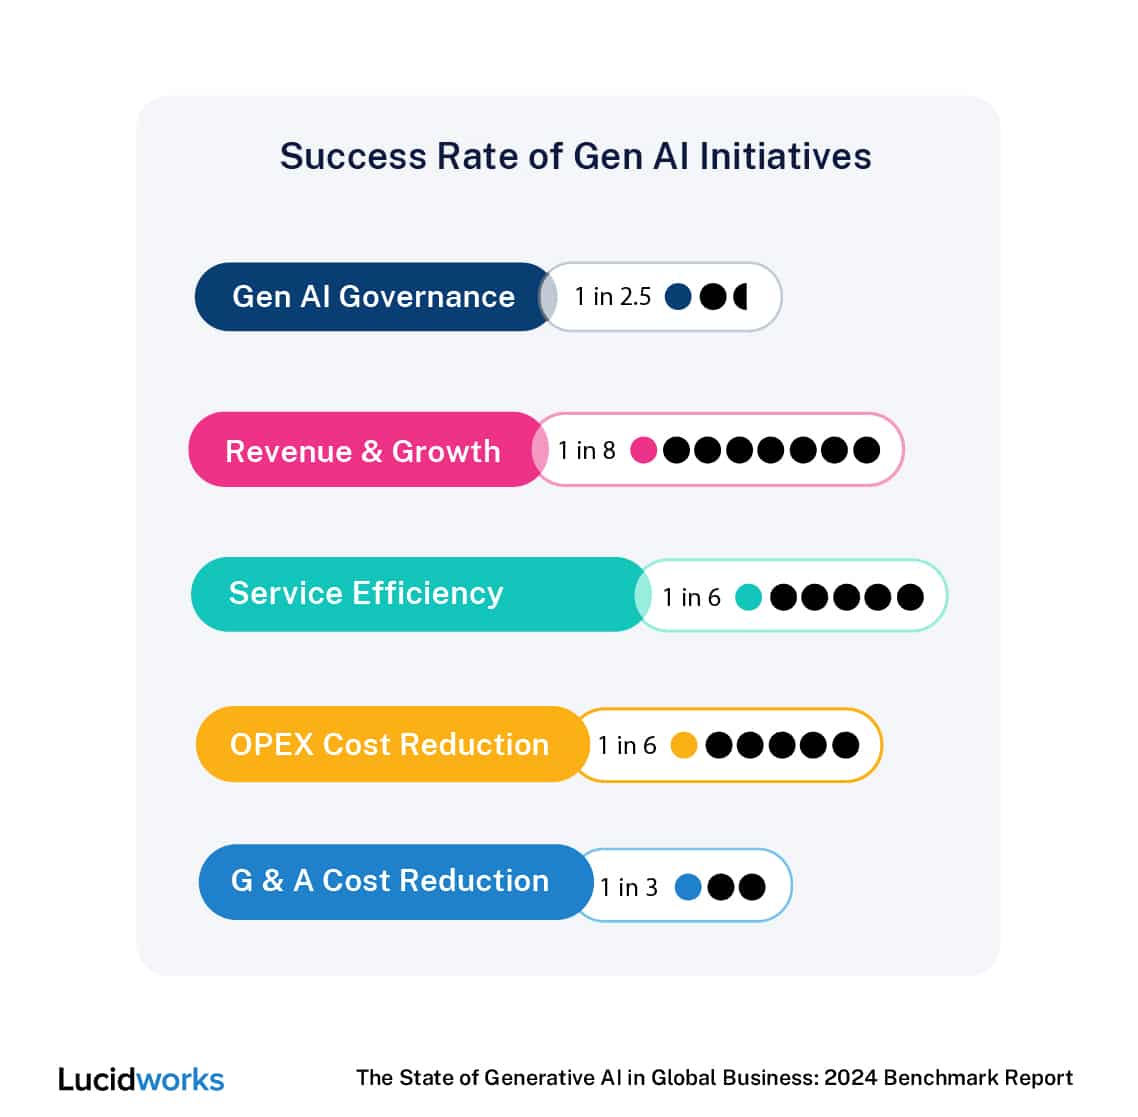 A Lucidworks graph titled "Success Rate of Gen AI Initiatives" shows the success rate of different types of generative AI initiatives. The most successful are those related to AI governance, with a 1 in 2.5 success rate. The least successful are those related to revenue & growth, with only a 1 in 8 success rate.